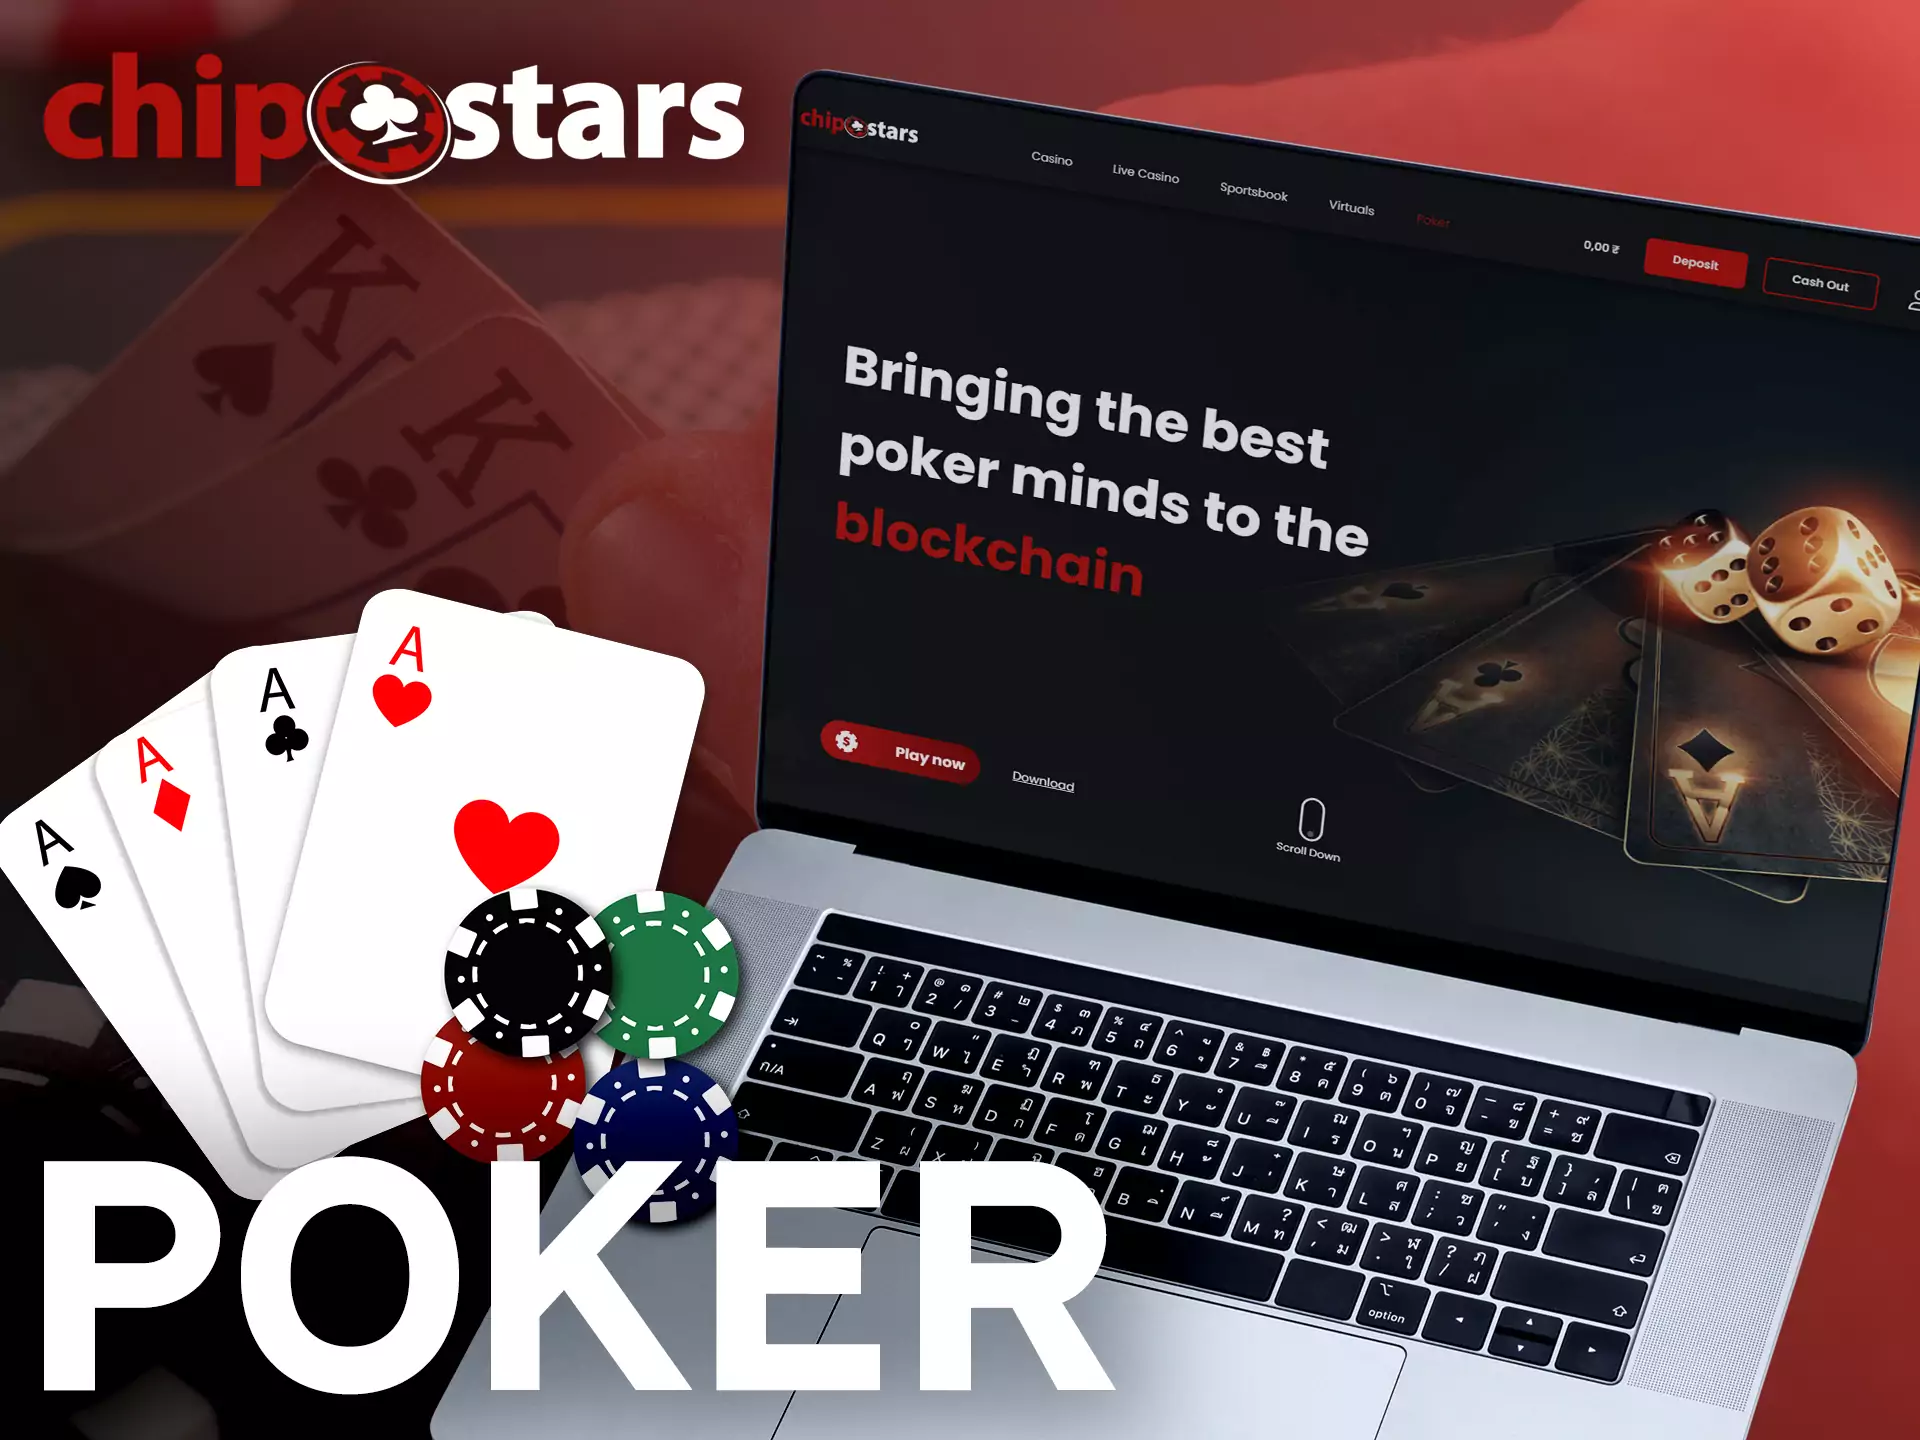 You can play the game of poker in the Chipstars Casino.